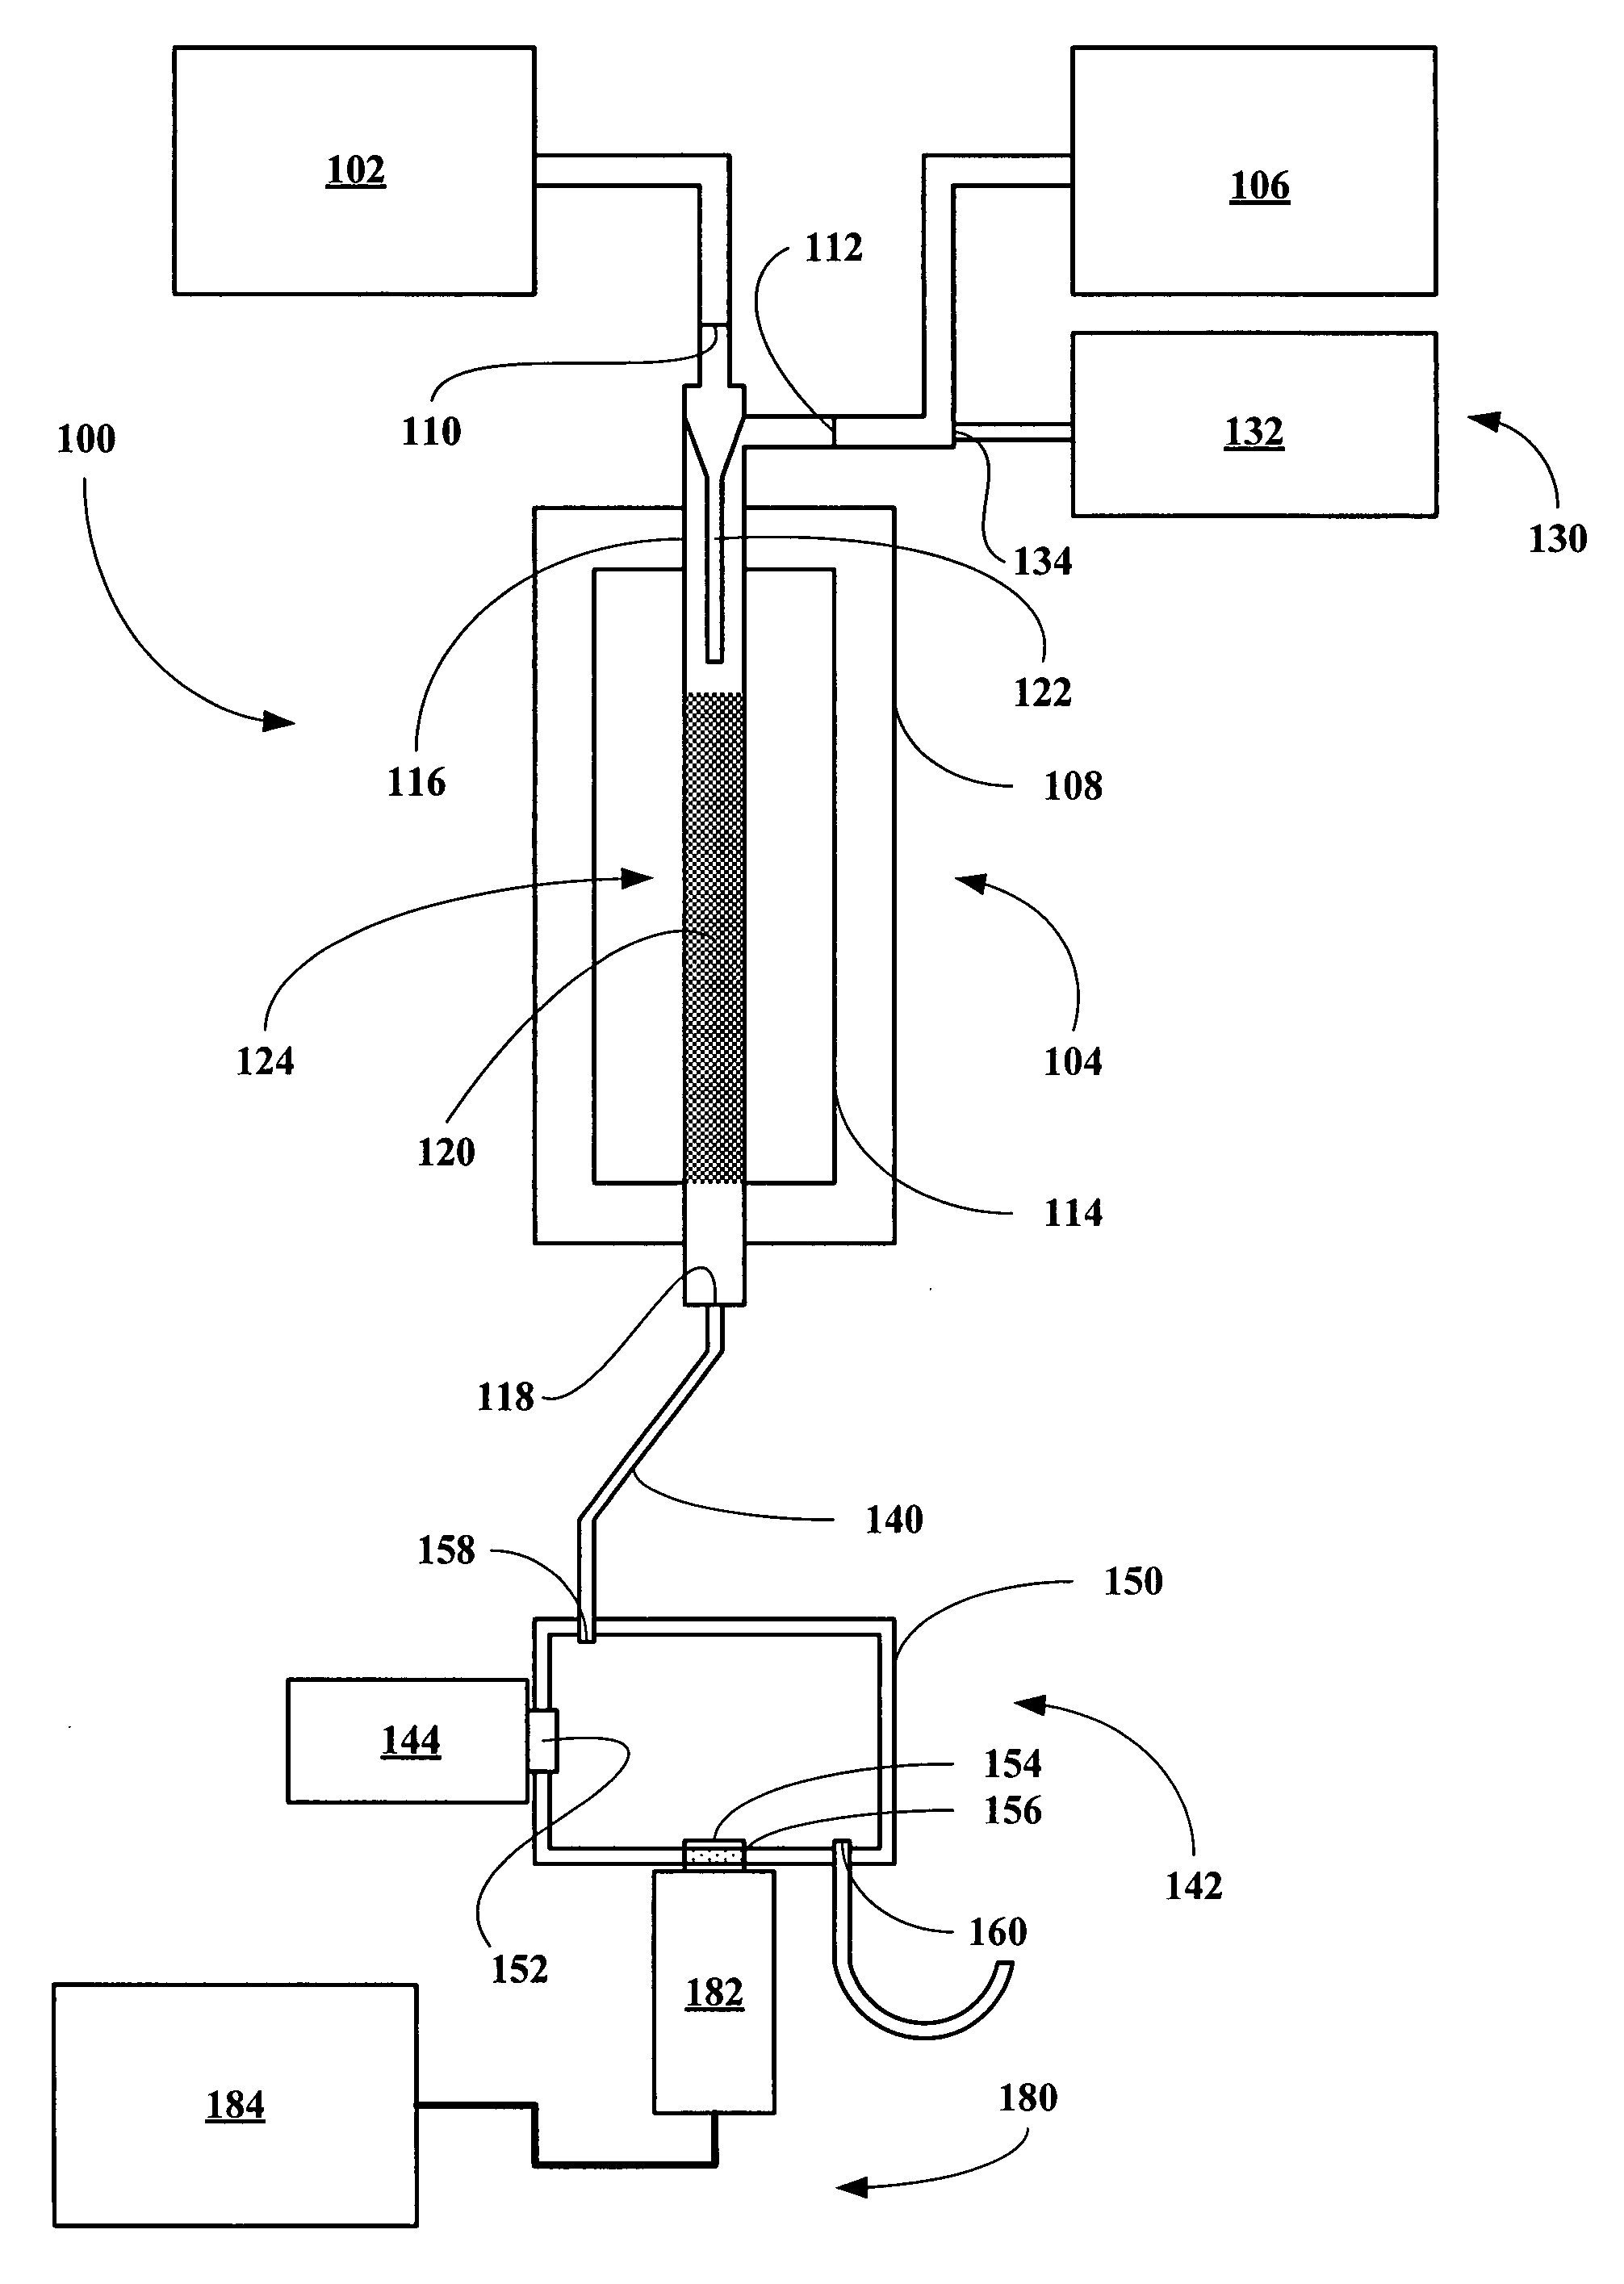 Apparatus for trace sulfur detection using UV fluorescence